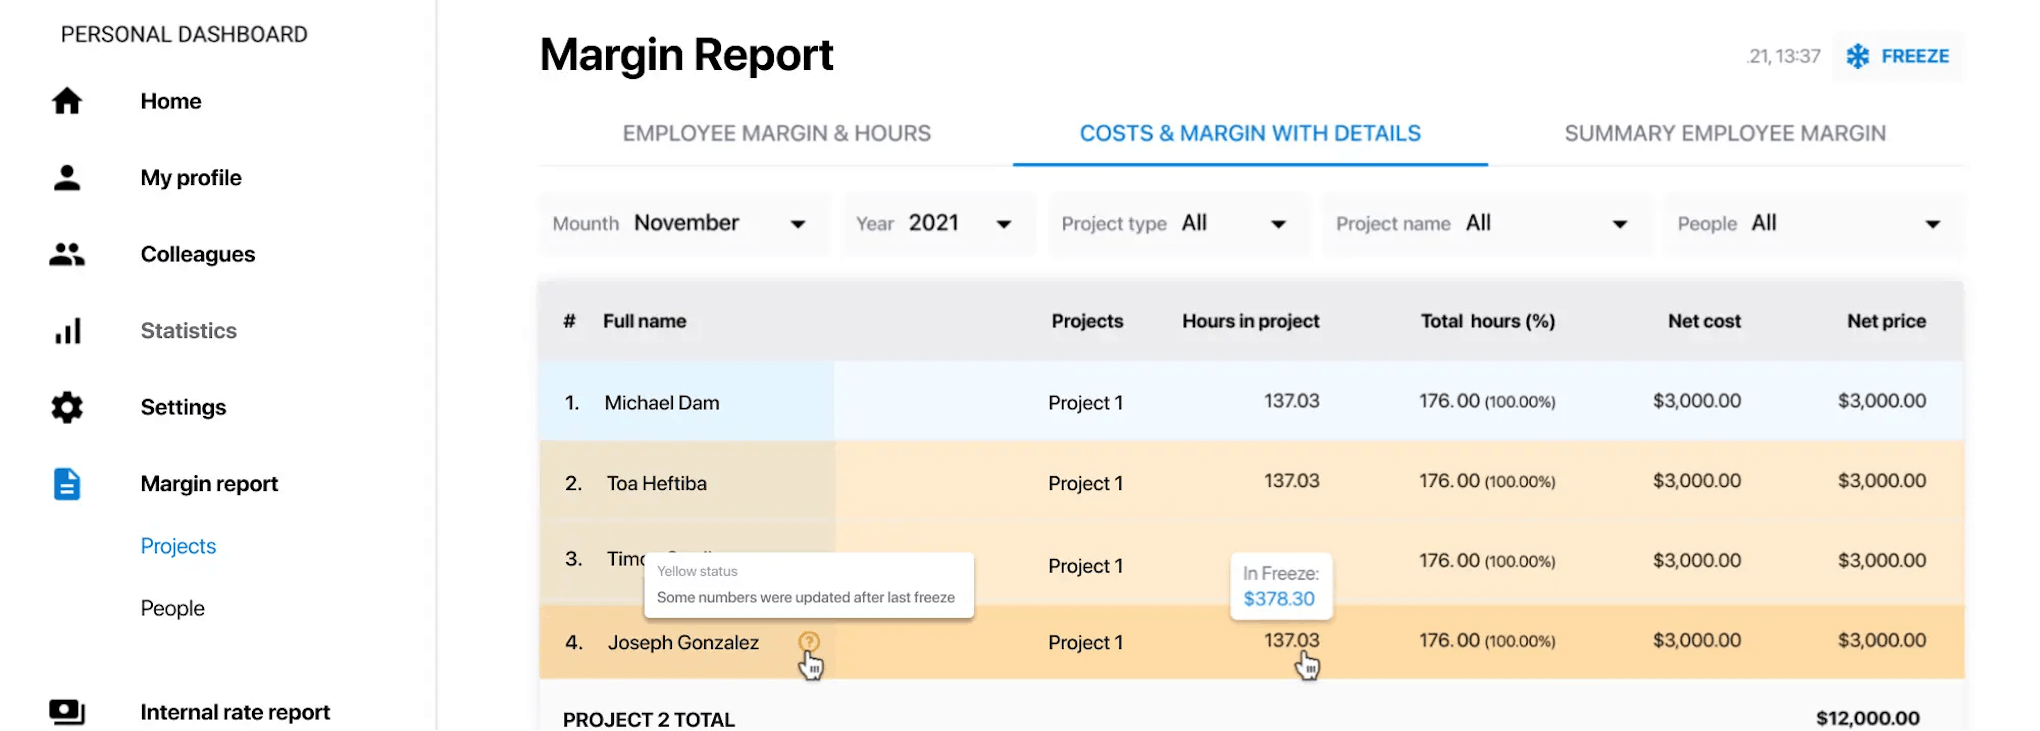 Freezing the State of the Margin Report